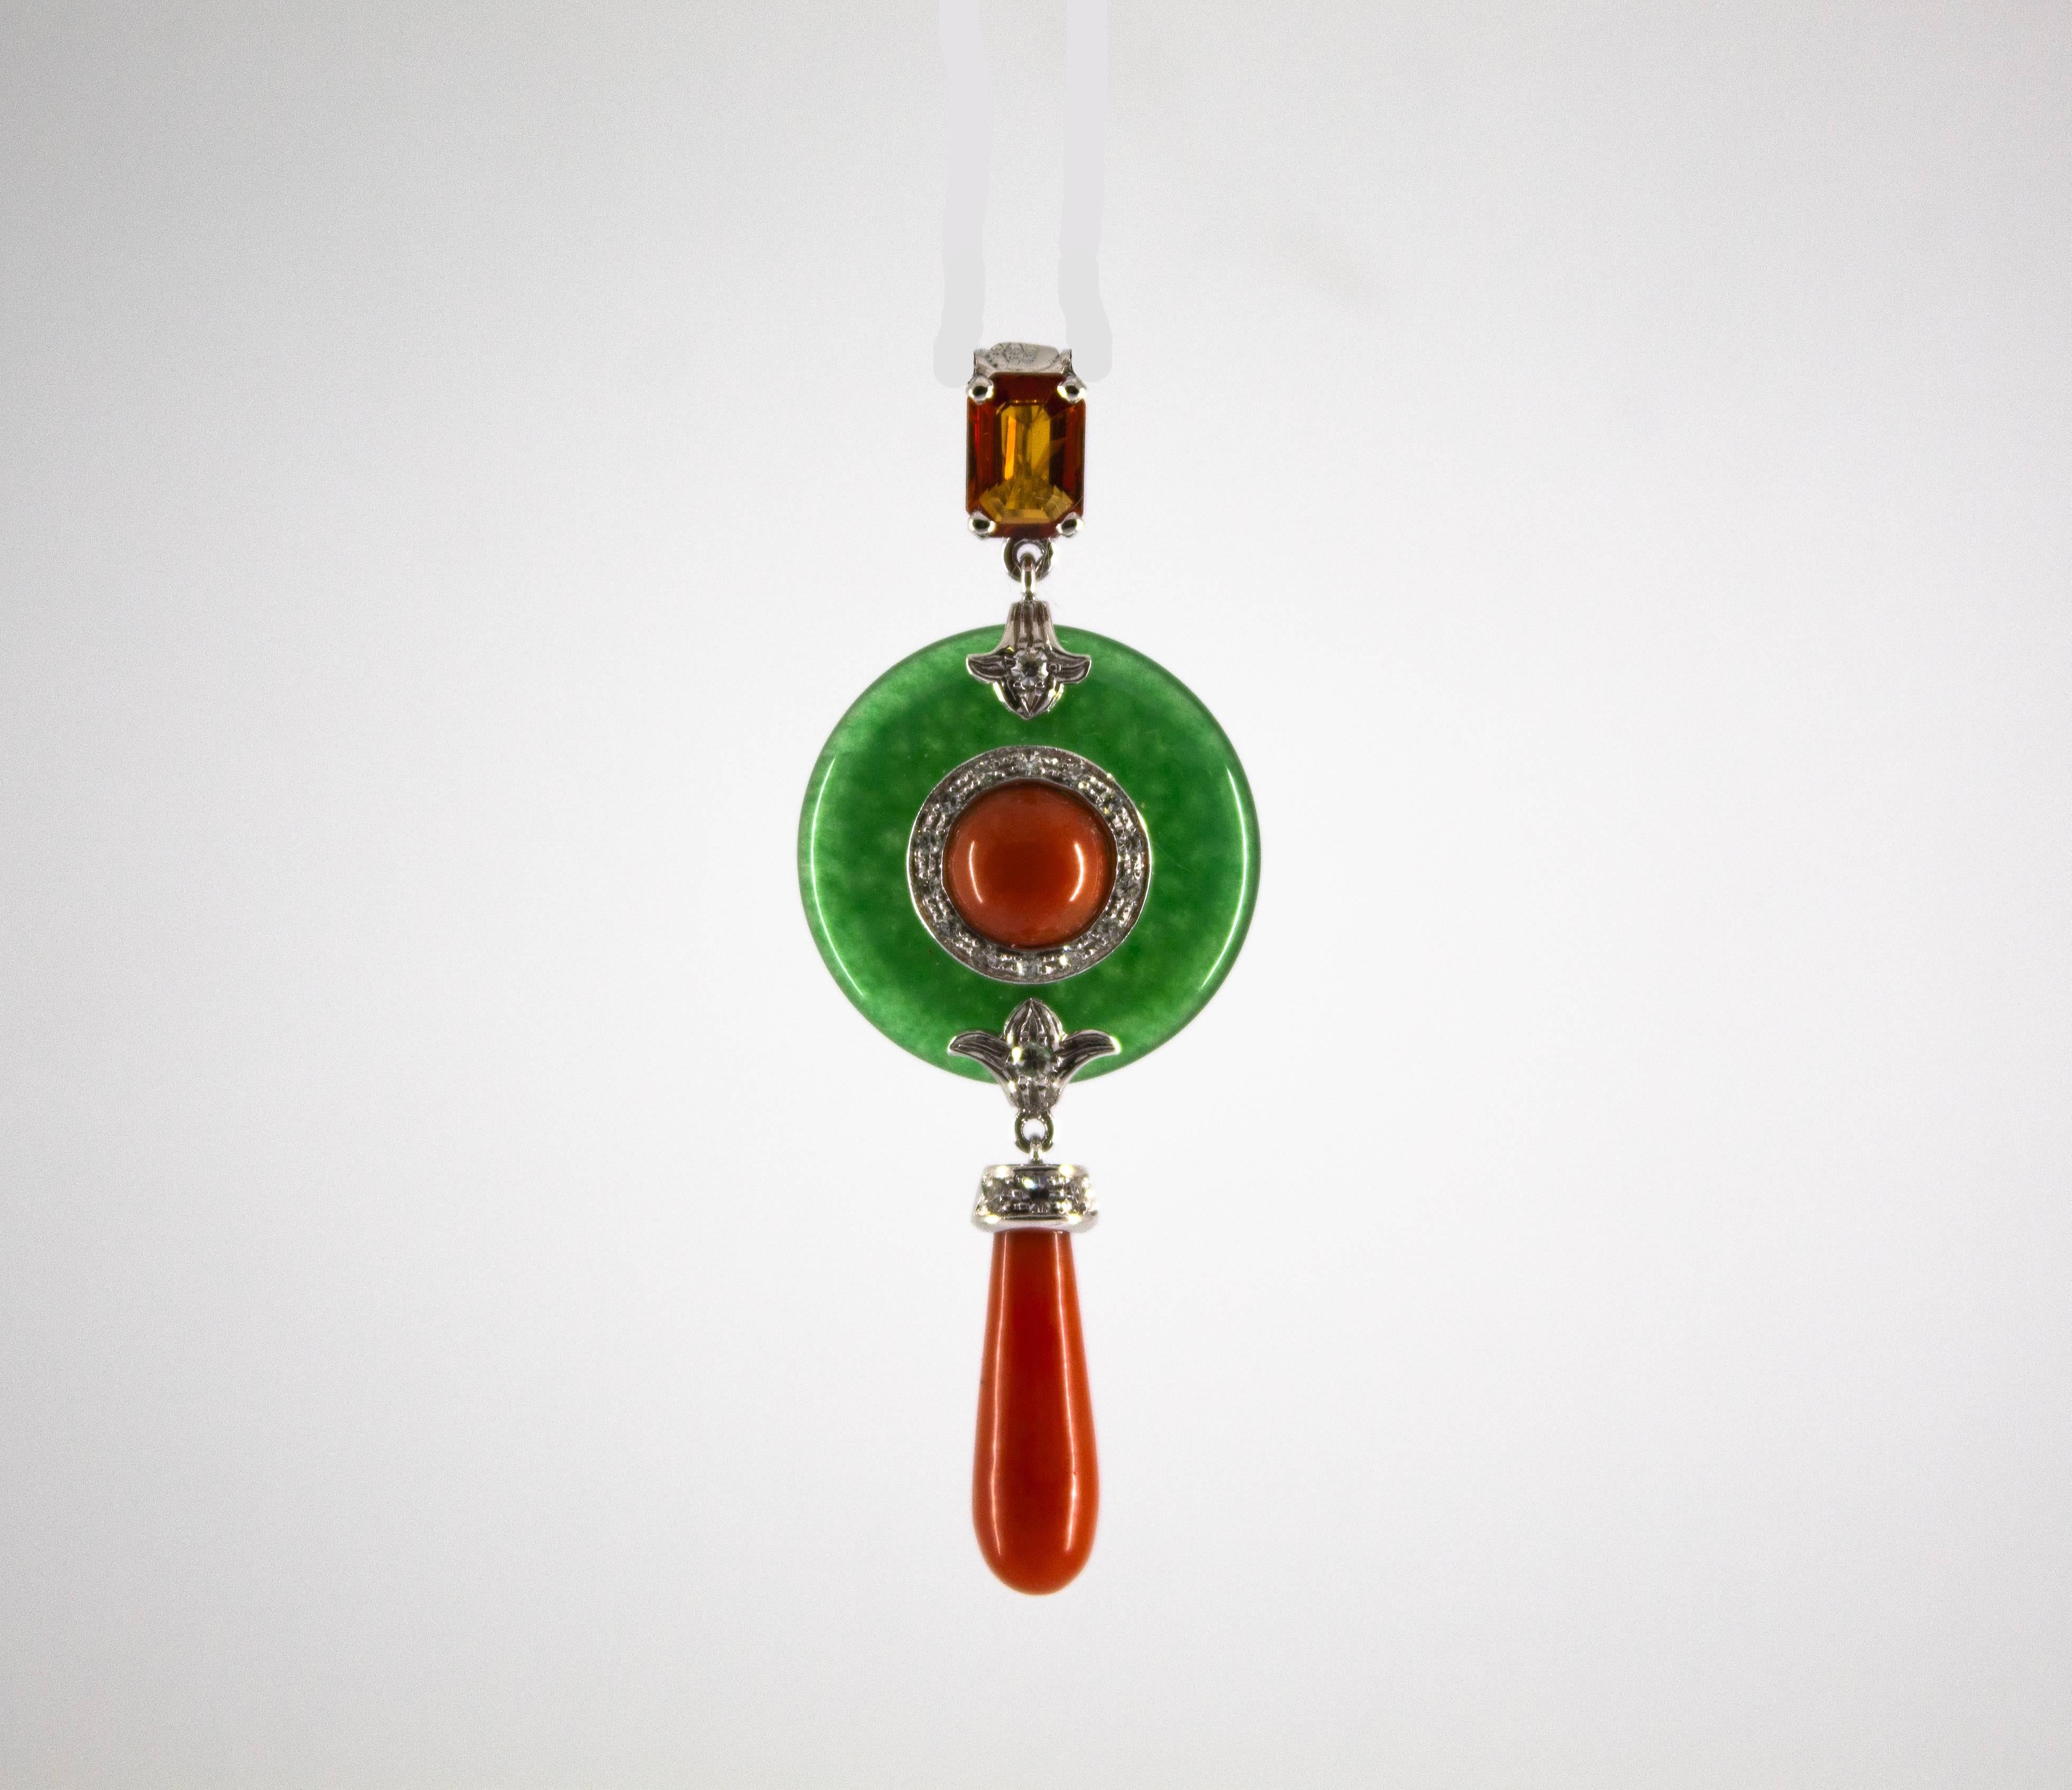 This Necklace is made of 14K White Gold.
This Necklace has 0.20 Carats of White Diamonds.
This Necklace has a 1.08 Carats Yellow Sapphire
This Necklace has also Jadeite and Mediterranean (Sardinia, Italy) Red Coral.
We're a workshop so every piece